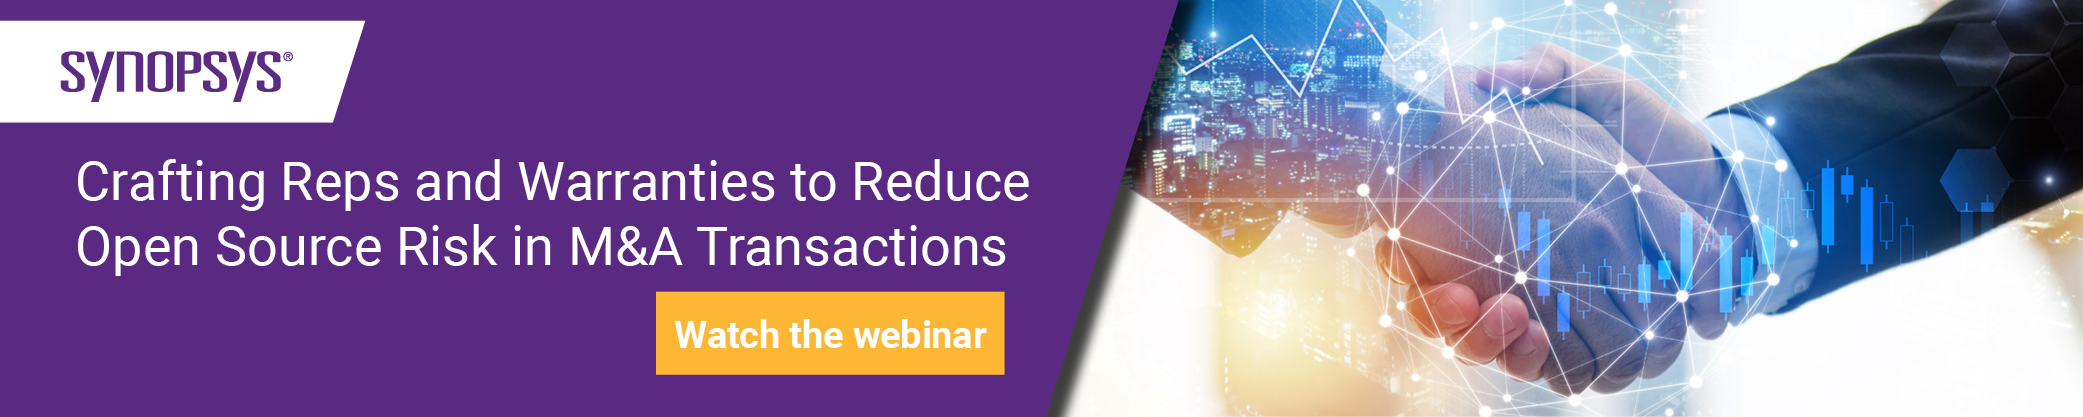 reduce open source risk in mergers and acquisitions transactions webinar | Synopsys